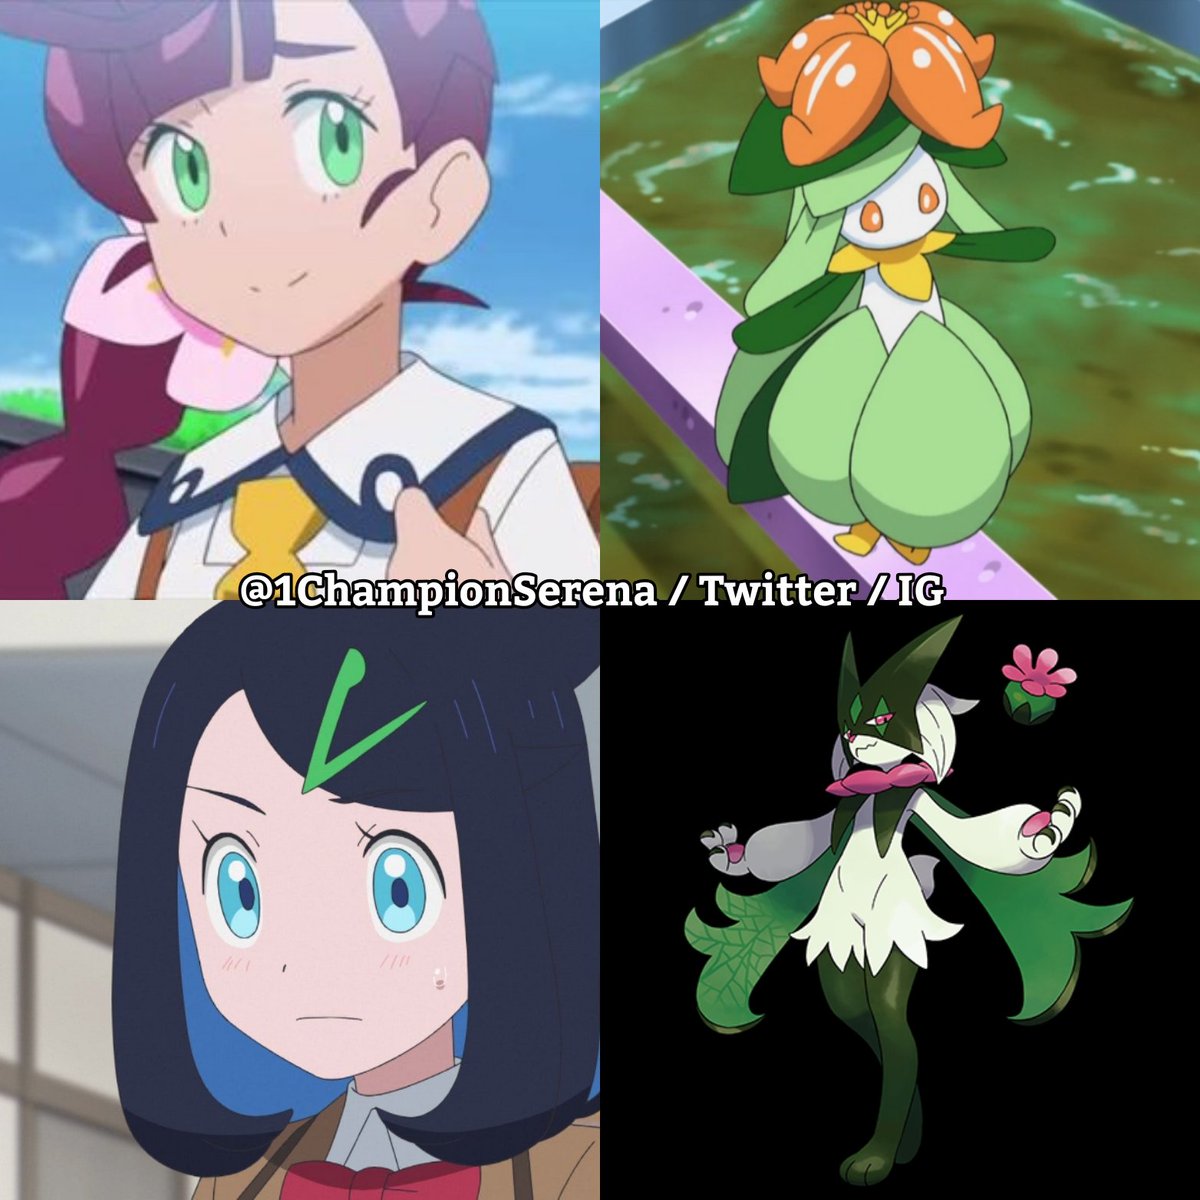 Dawn would take Leafeon, they're perfect on her teams 7th for Contest!

Iris would caught, bit look like twin dragons to me. But not! It's grass / fire type. I'm thought Dragon / Grass type! 🤣

Serena would caught a cute Bellossom, just like her dancer!

#anipoke